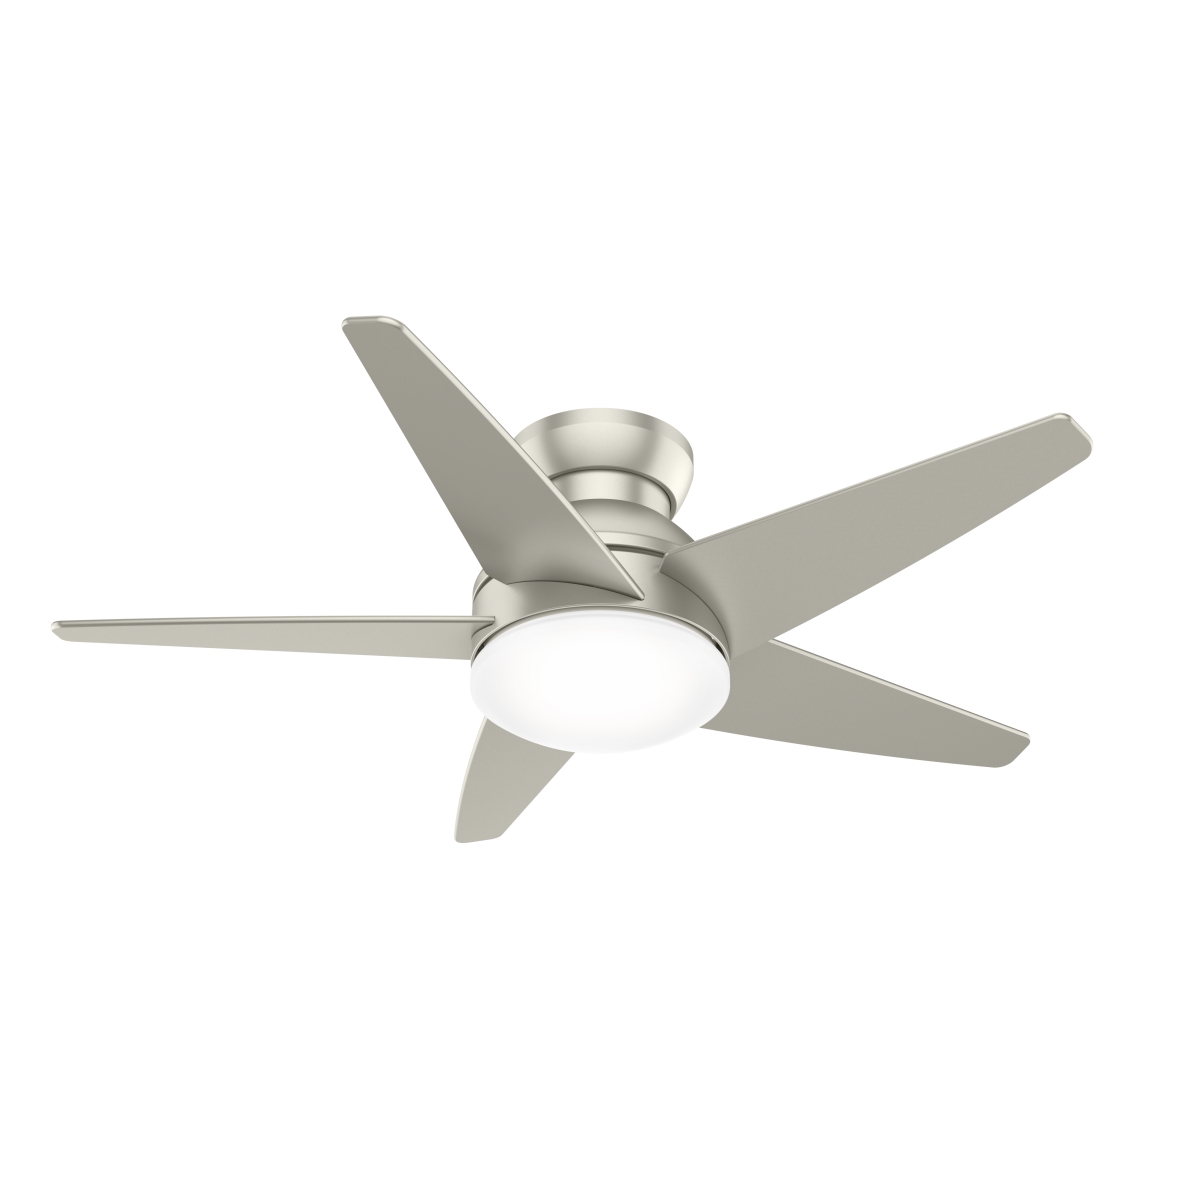 Picture of Casablanca 51742 44 in. Isotope Matte Nickel Low Profile Ceiling Fan with LED Light Kit & Wall Control